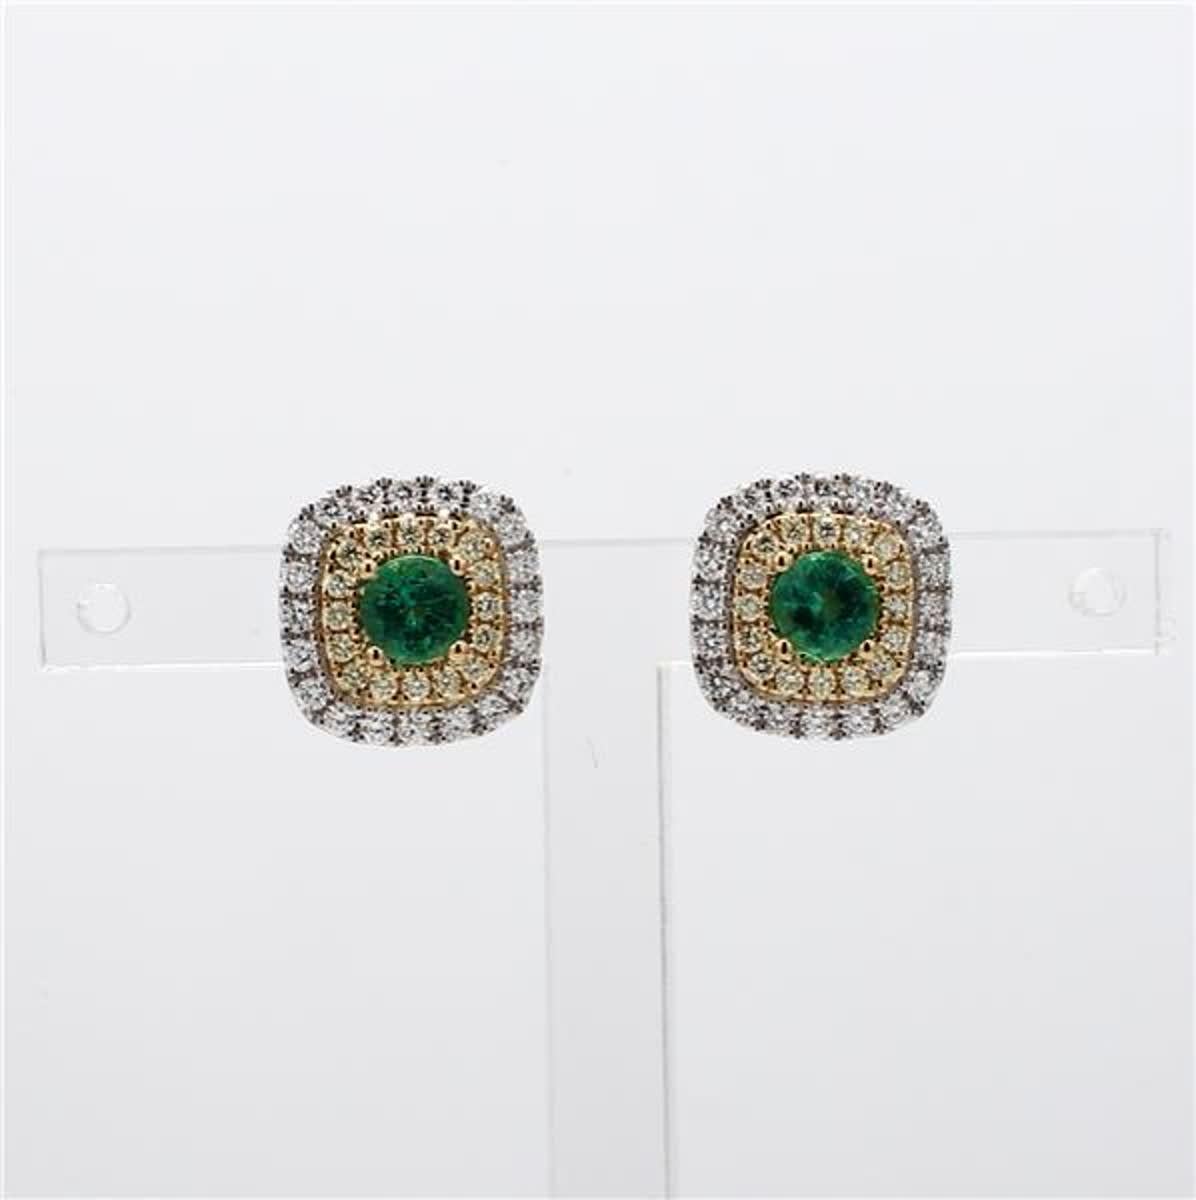 RareGemWorld's classic emerald earrings. Mounted in a beautiful 18K Yellow and White Gold setting with natural round cut green emerald's. The emerald's are surrounded by natural round white diamond melee and natural round yellow diamond melee. These